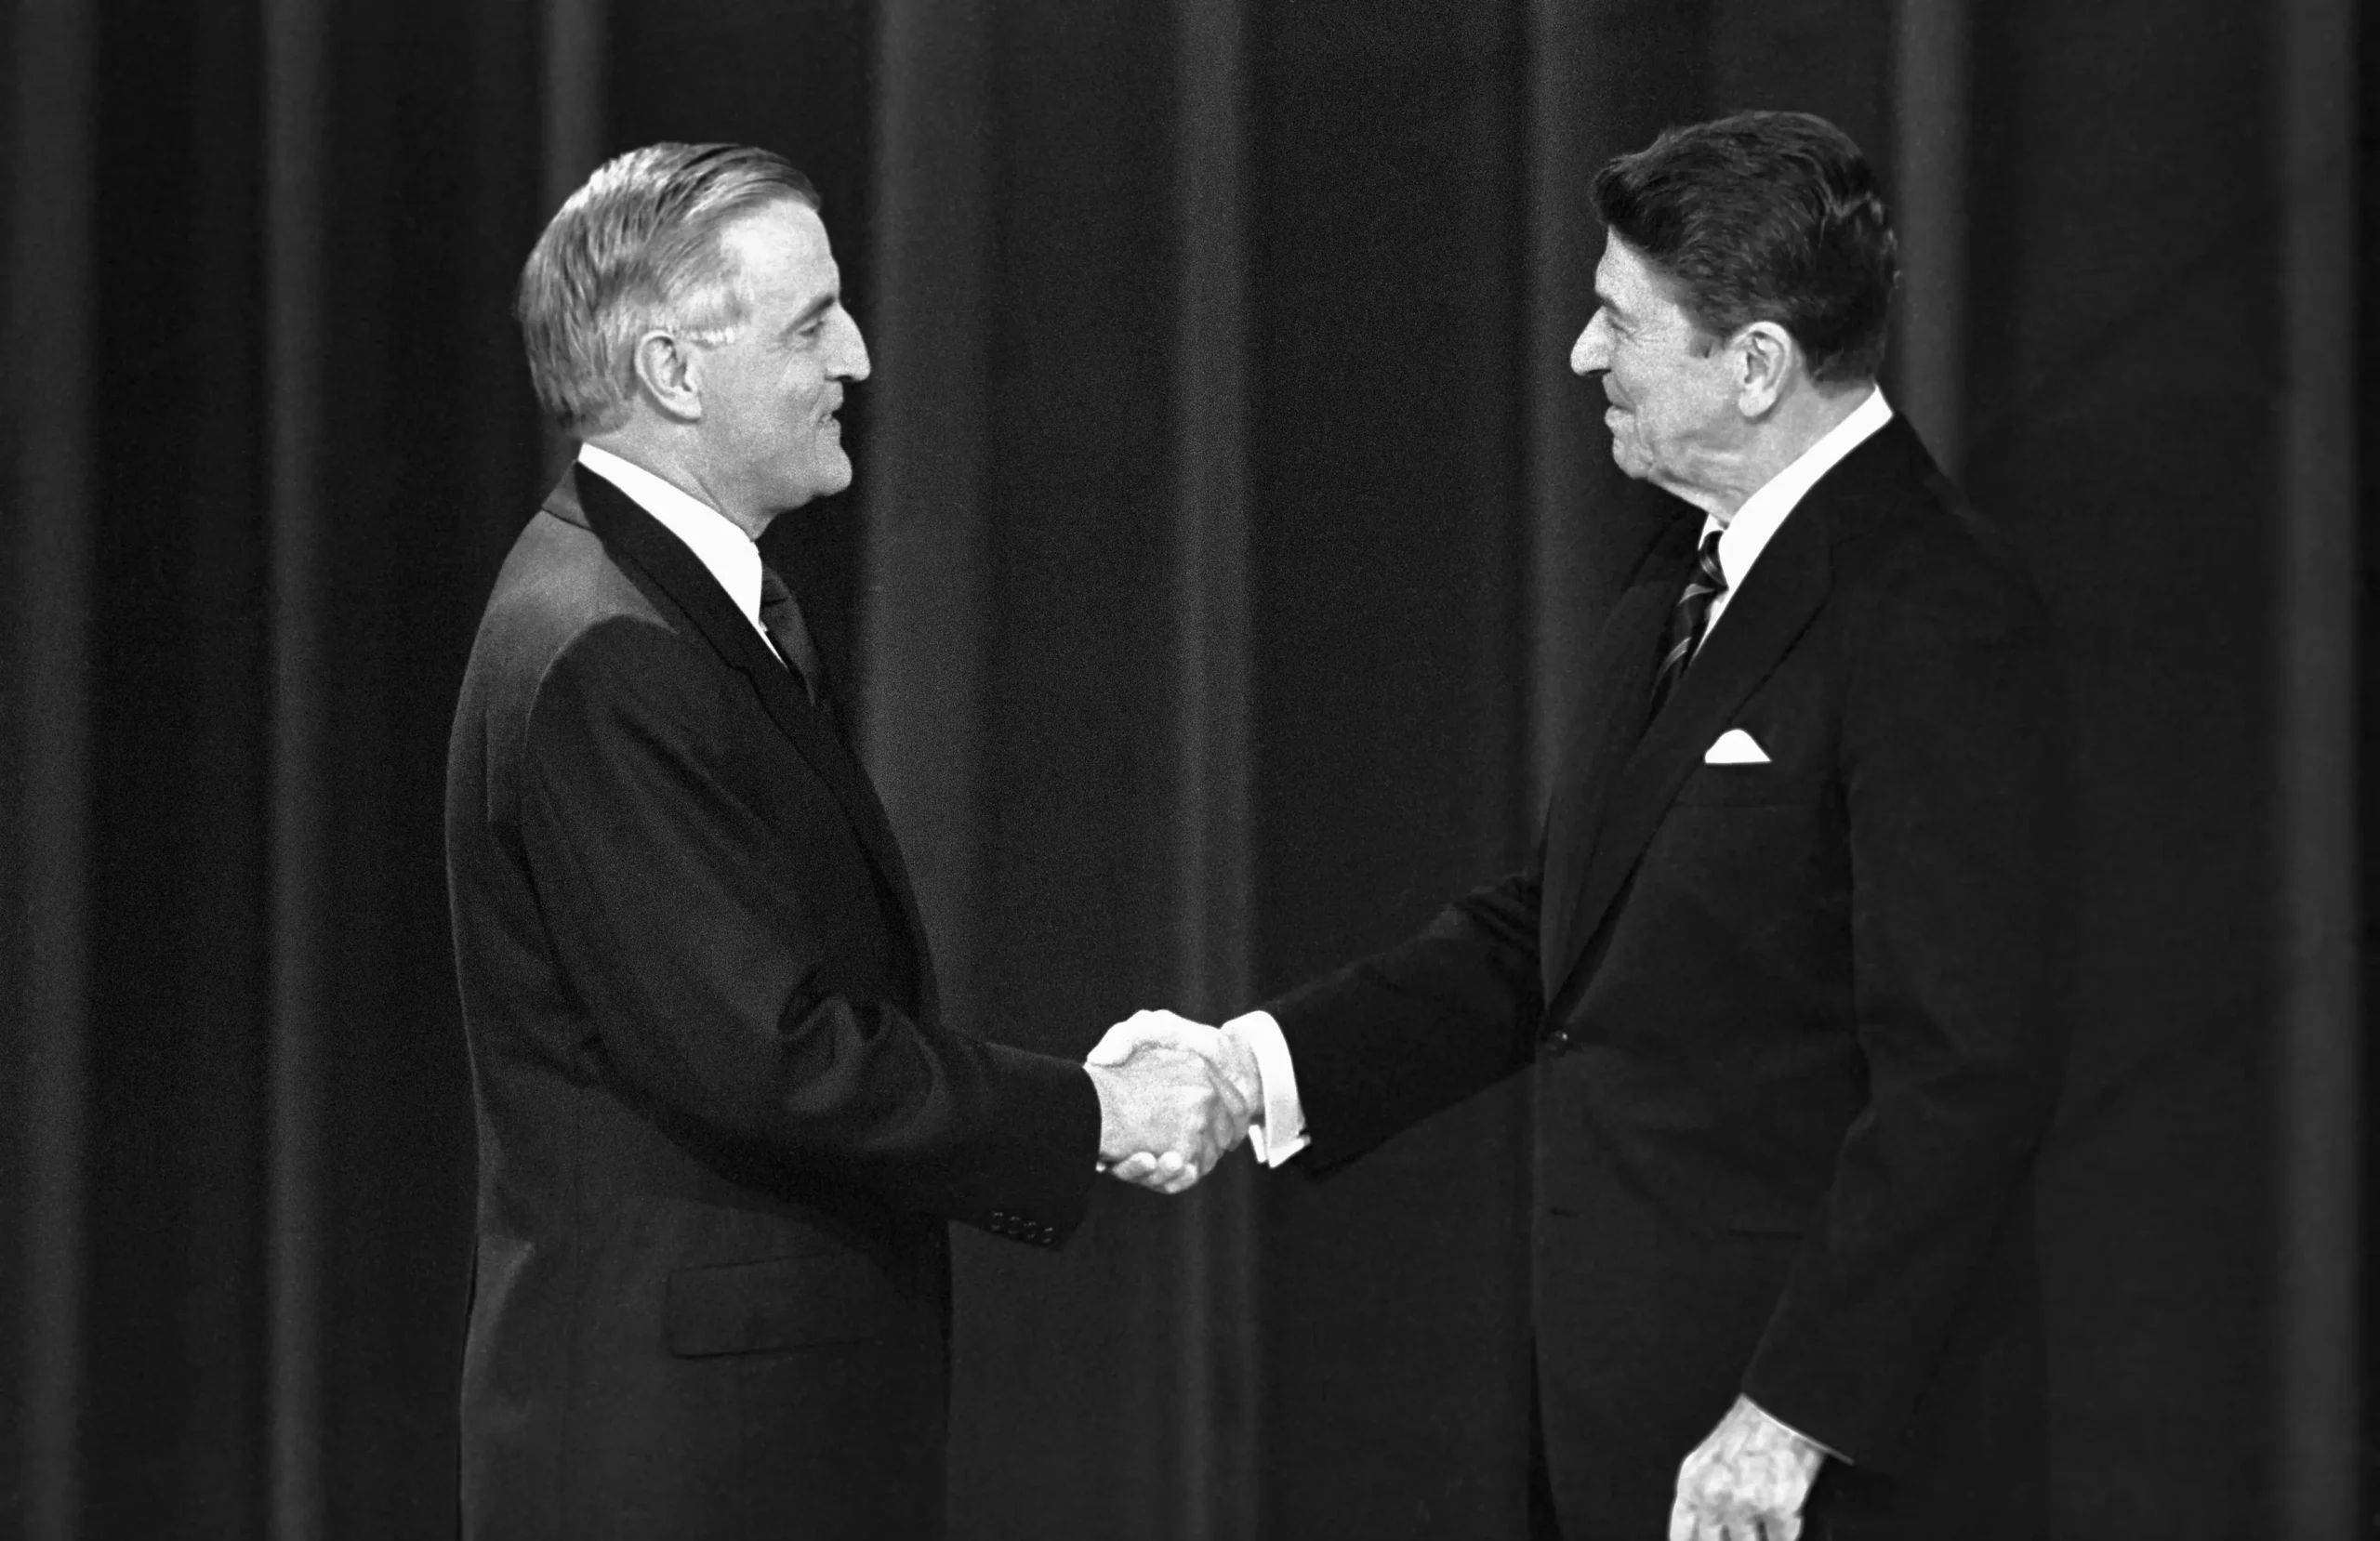 President Ronald Reagan, right, and former Vice President Walter Mondale greet each other before their first debate in 1984.